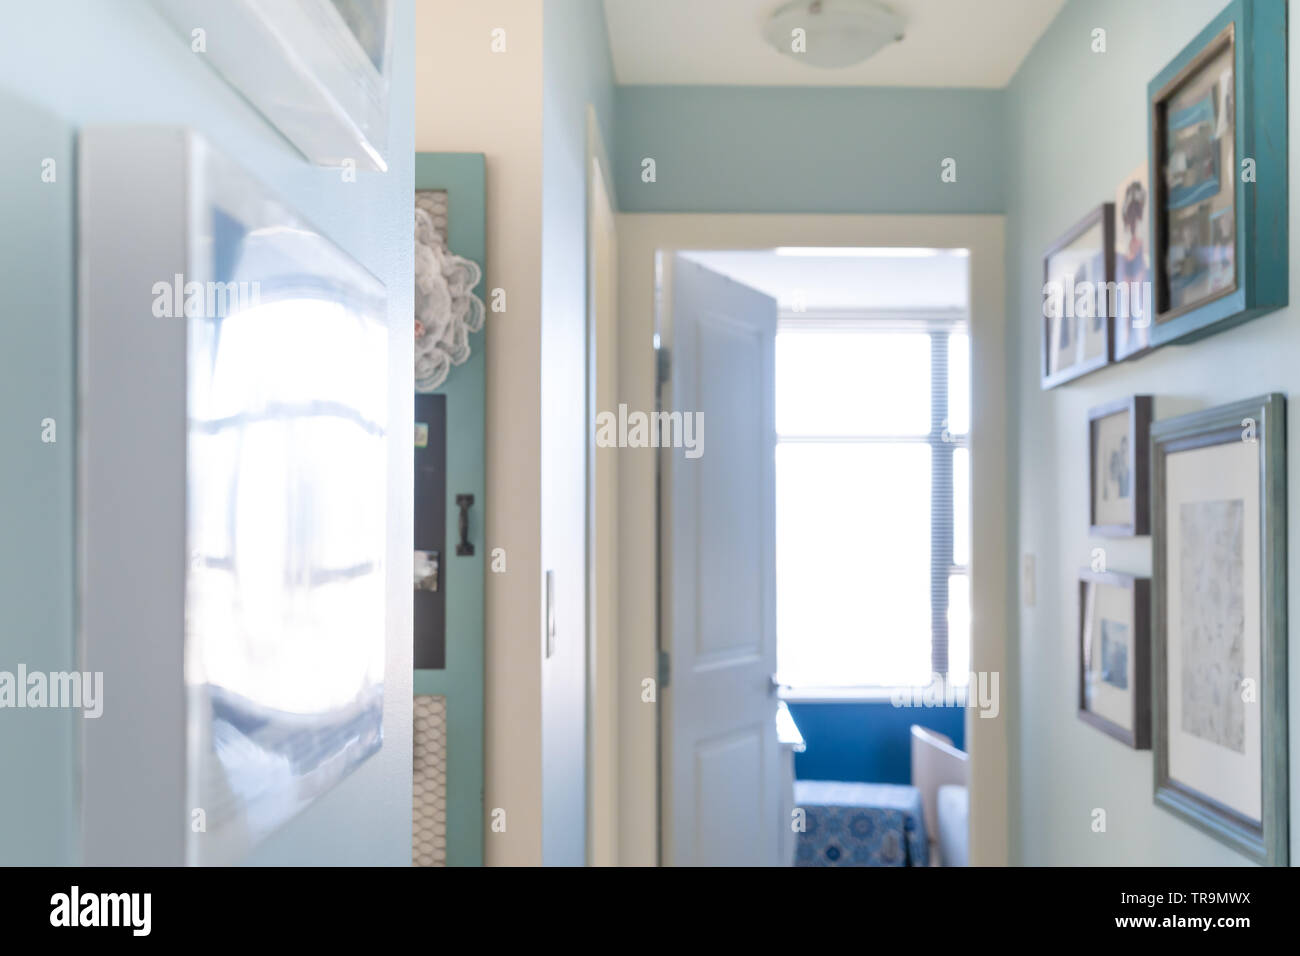 Home apartment hallway with picture frames as wall art, for interior decor with matching blue design and painter's work. Scene is a little hazy. Stock Photo